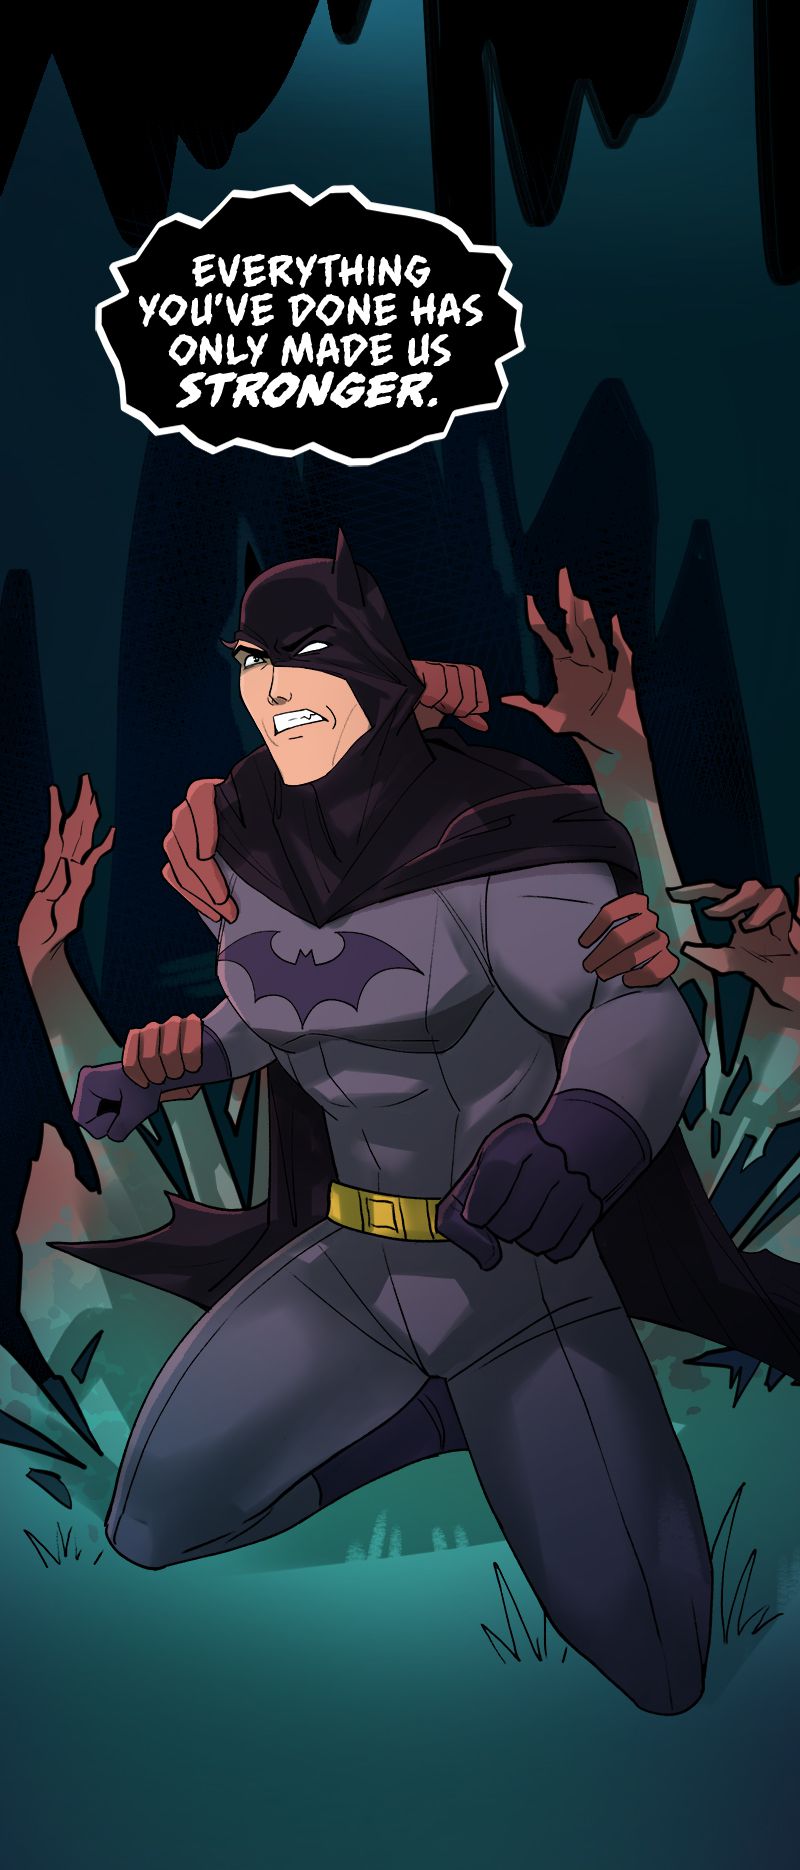 Batman struggles with disembodied hands that pull at his costume and cowl in Batman: Wayne Family Adventures.